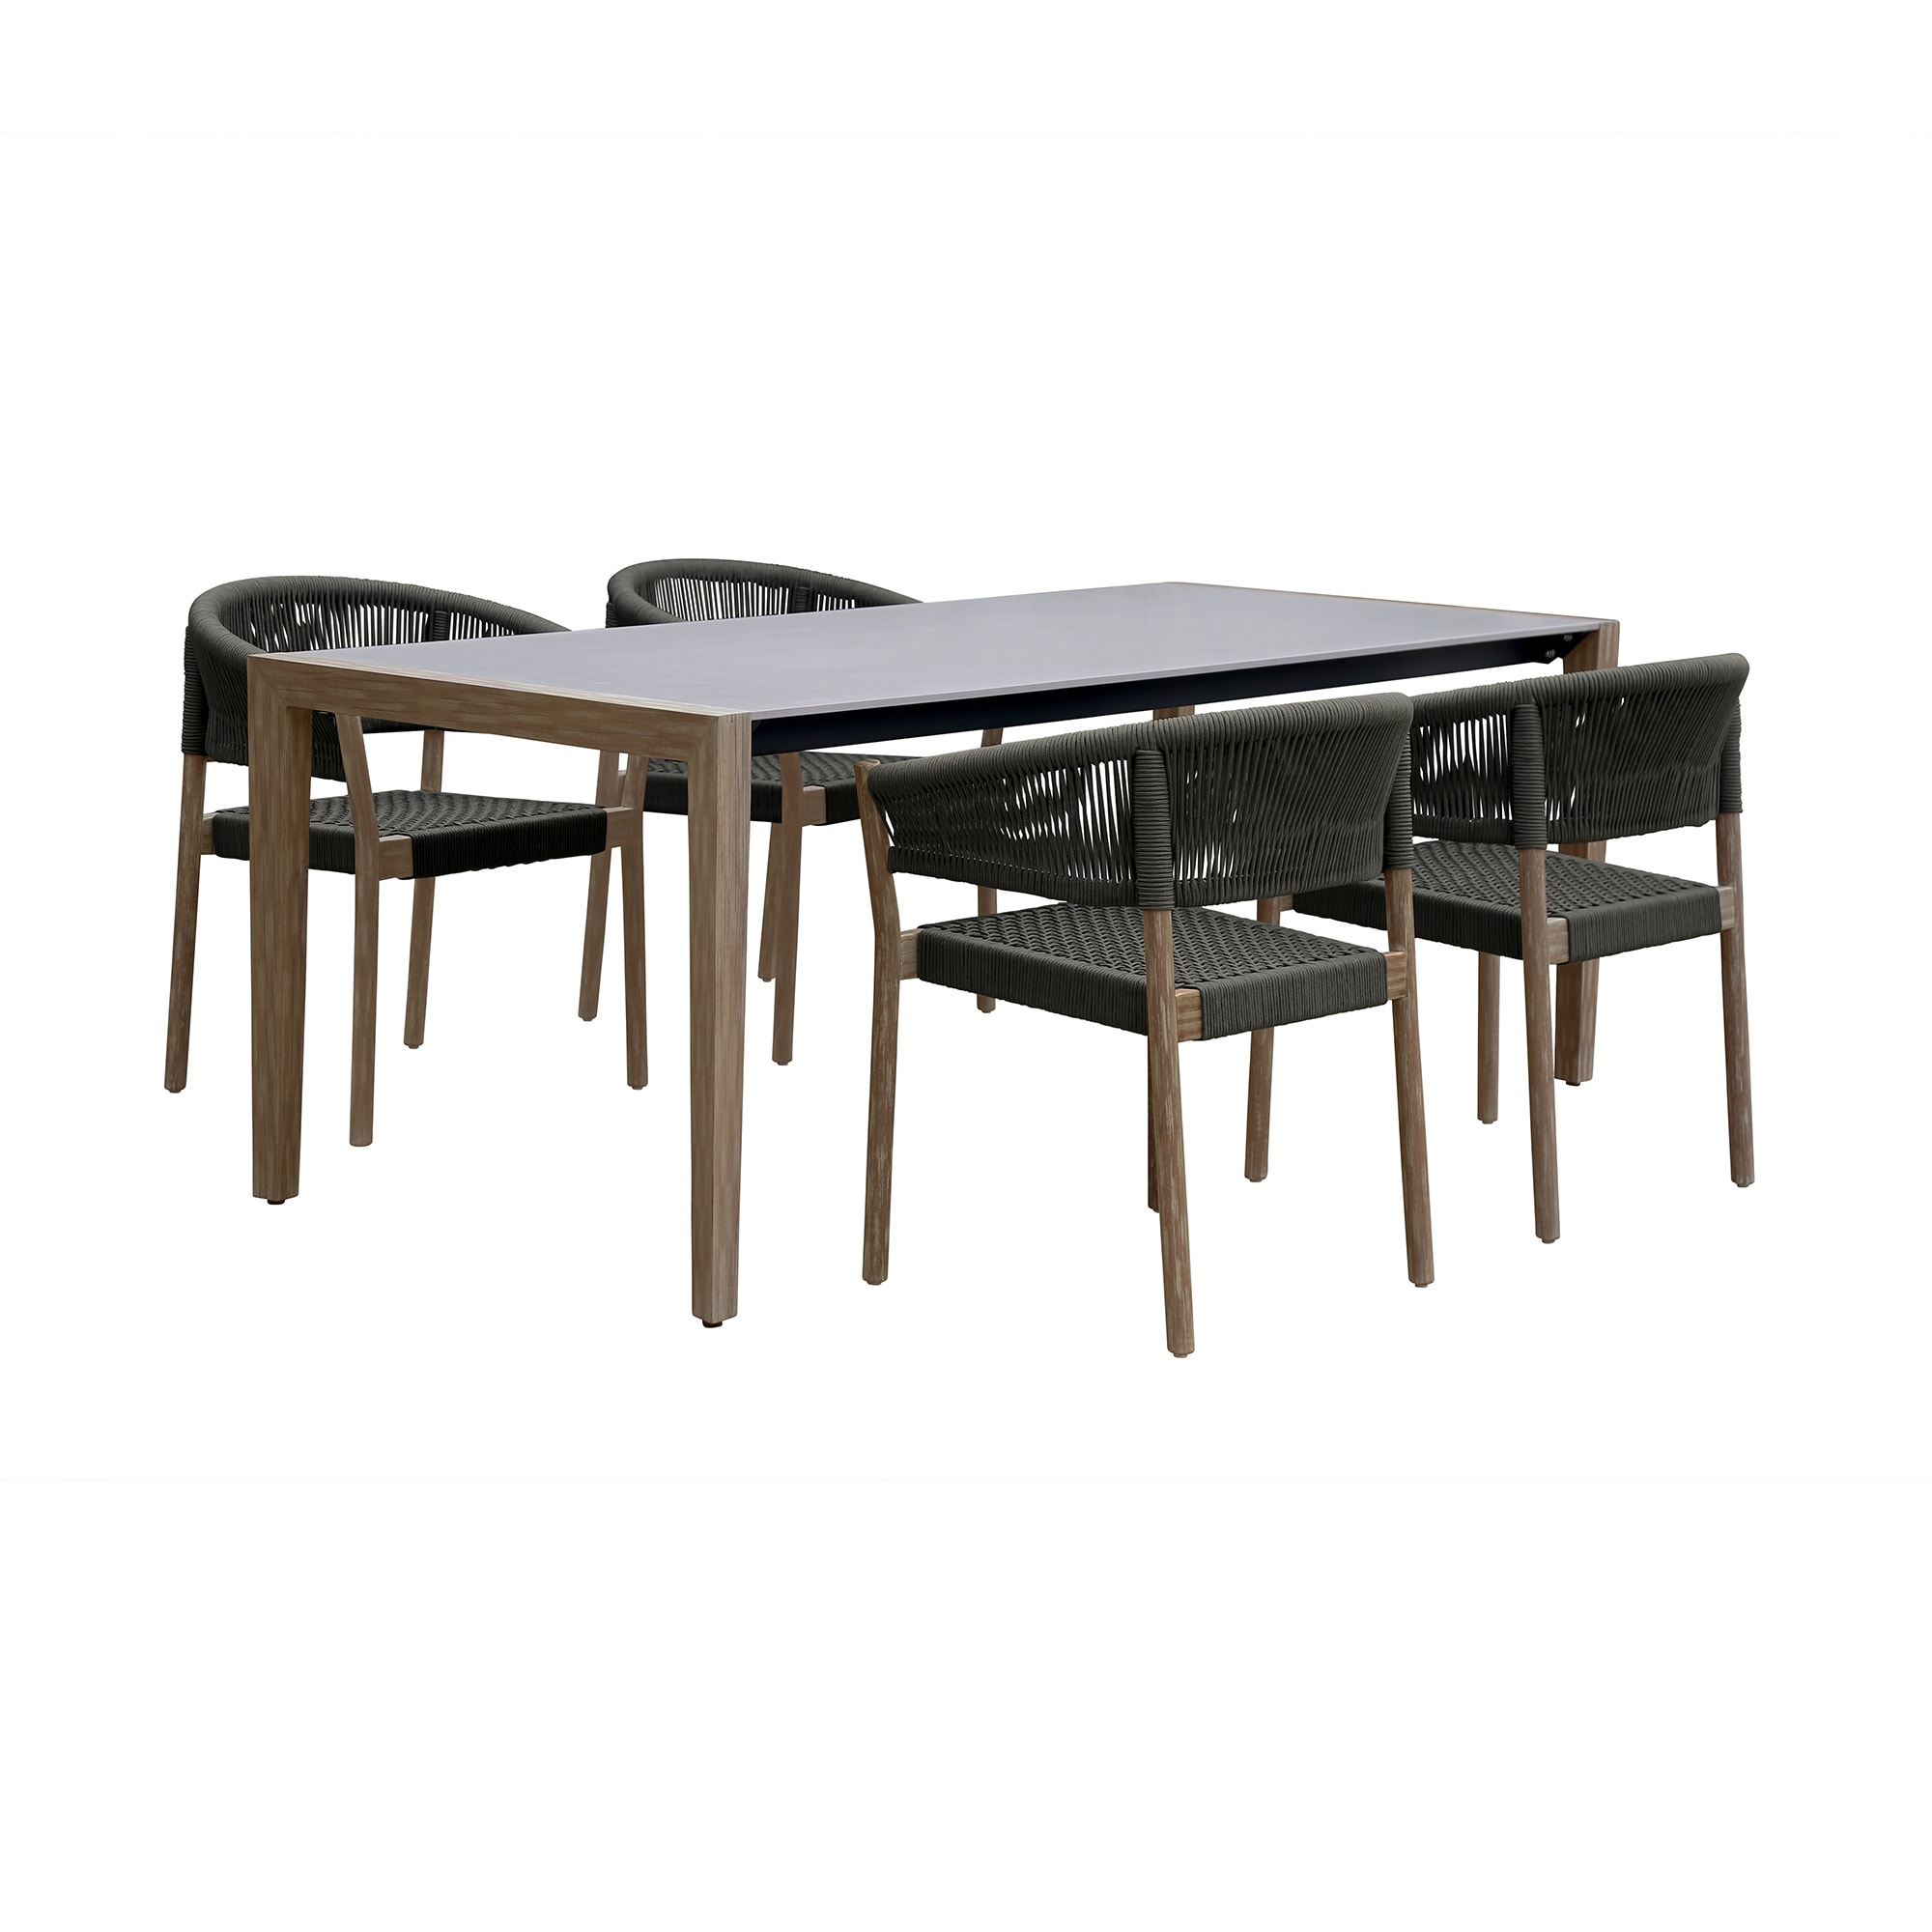 Fineline And Doris Indoor Outdoor 5 Piece Dining Set In Eucalyptus Wood With Superstone With Rope